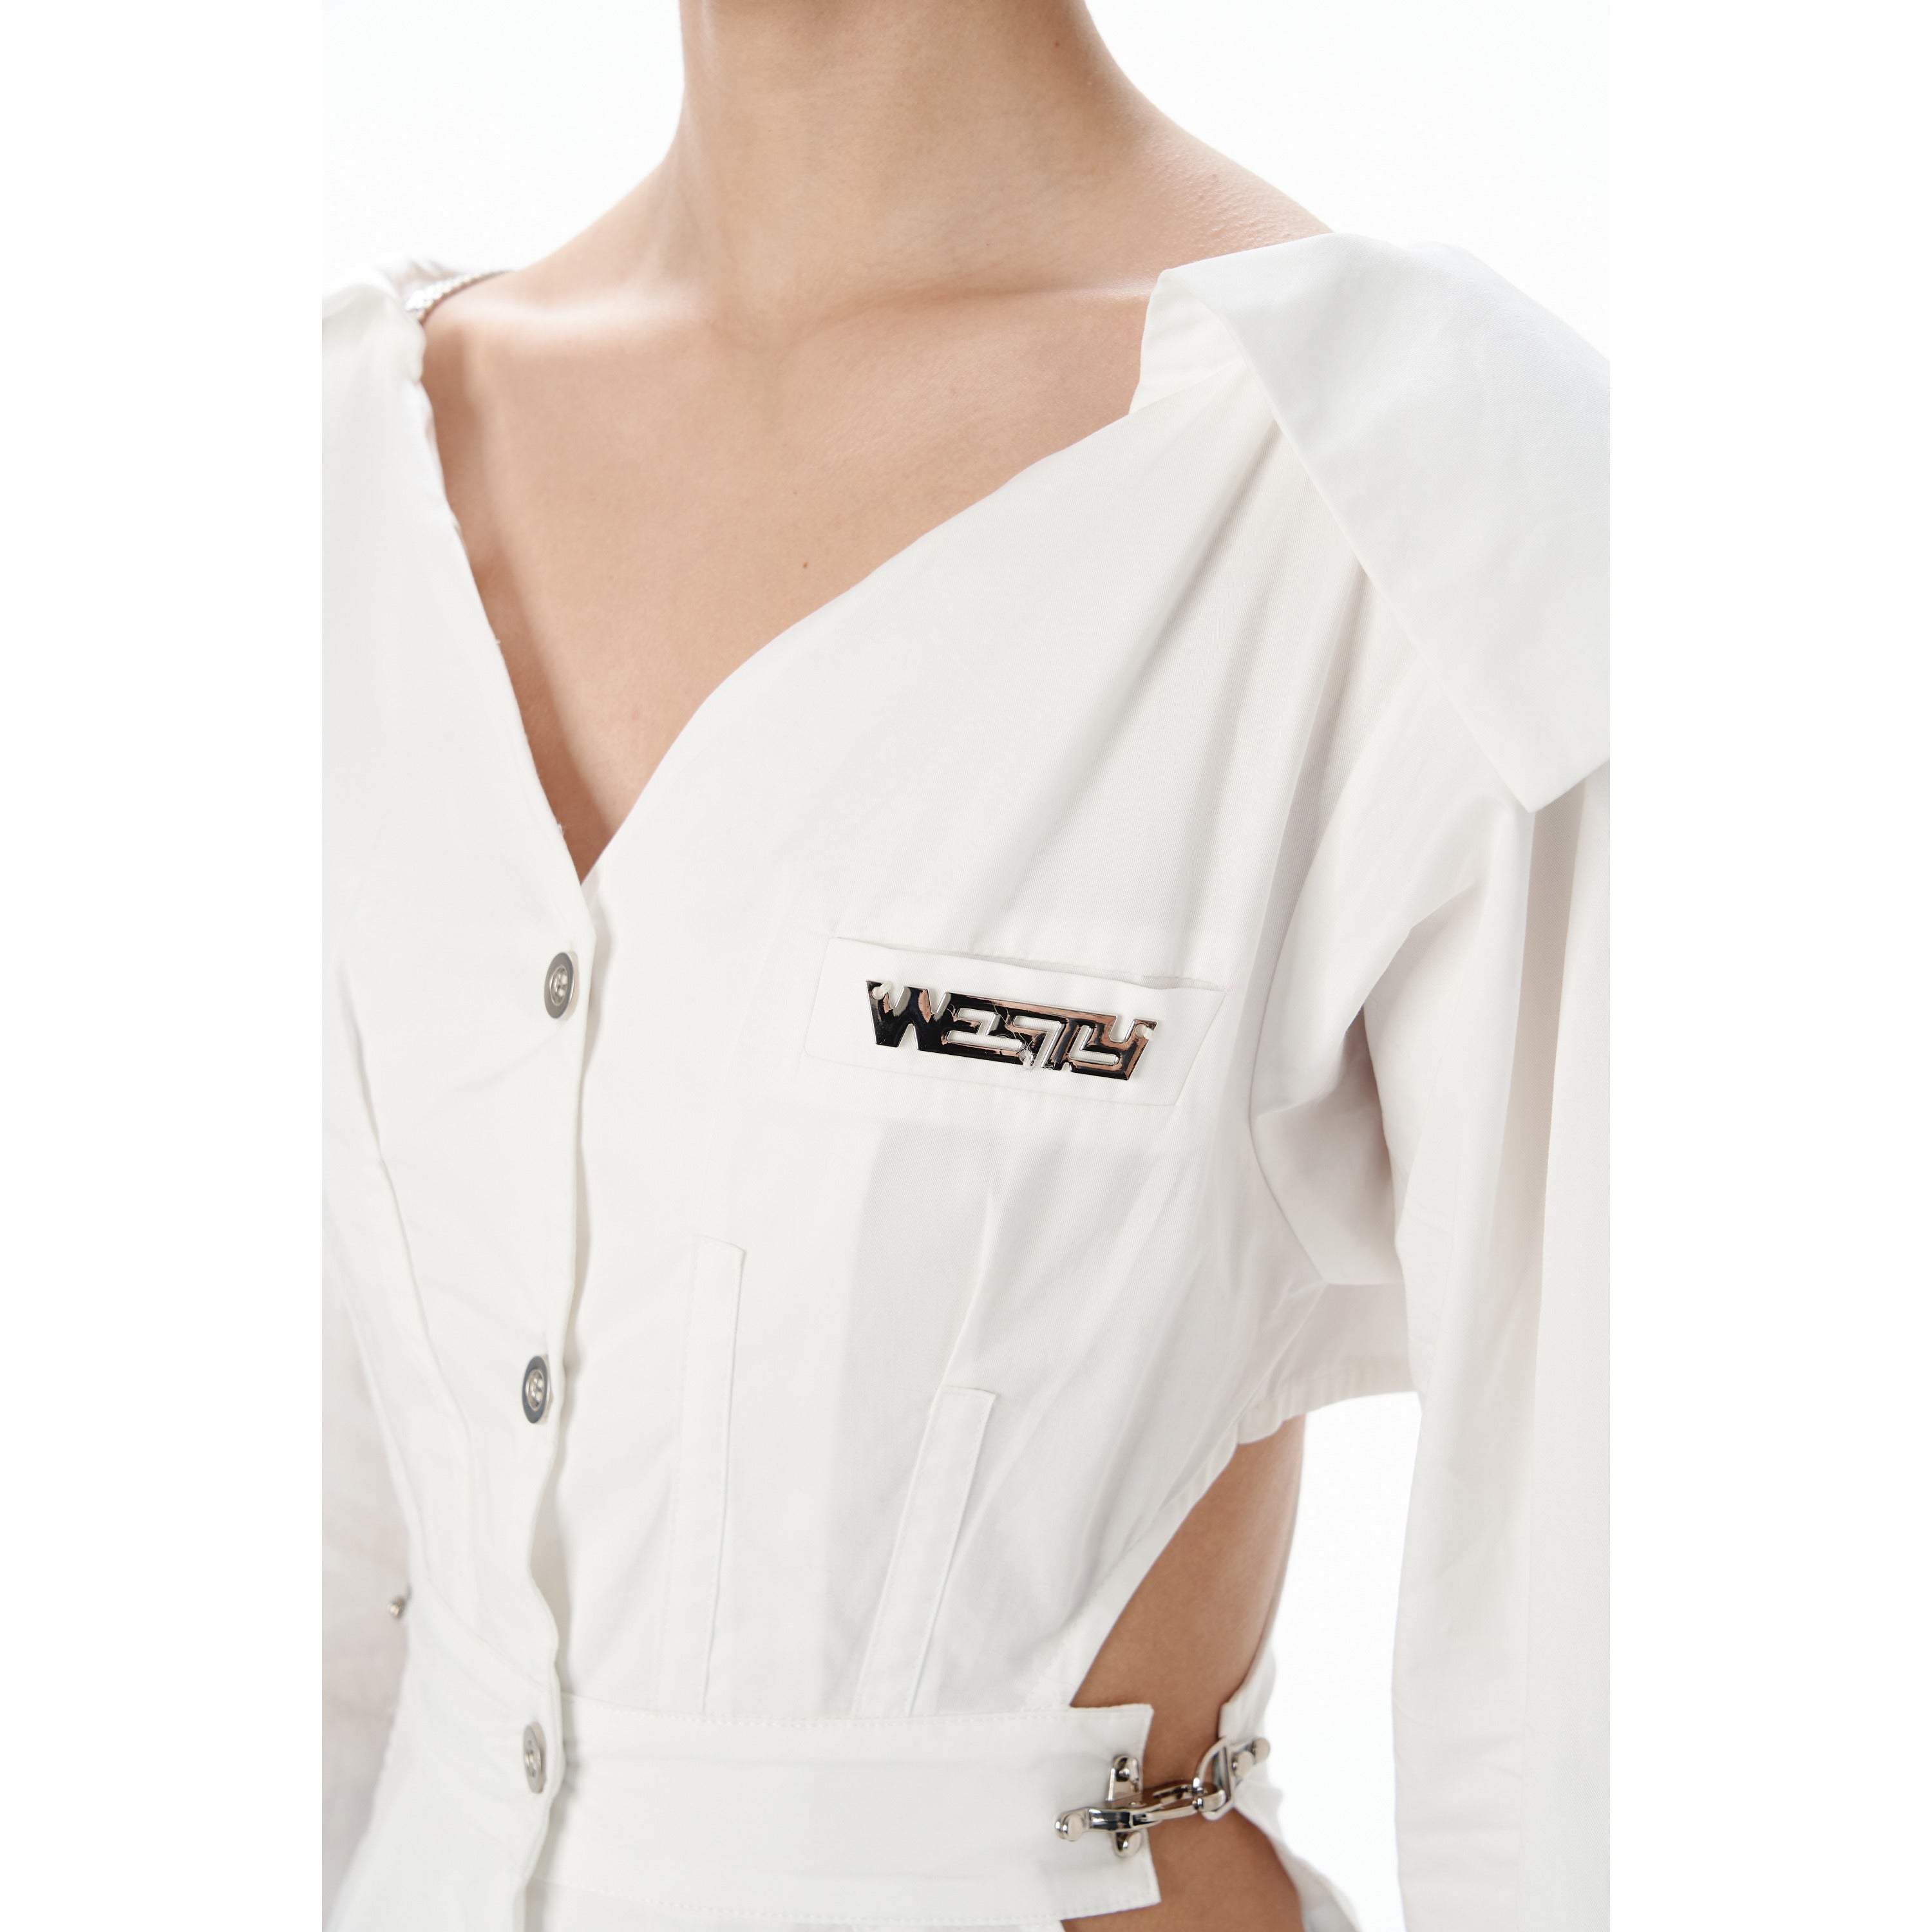 West.Y Cutting Out Logo Chain V-Neck Dress White